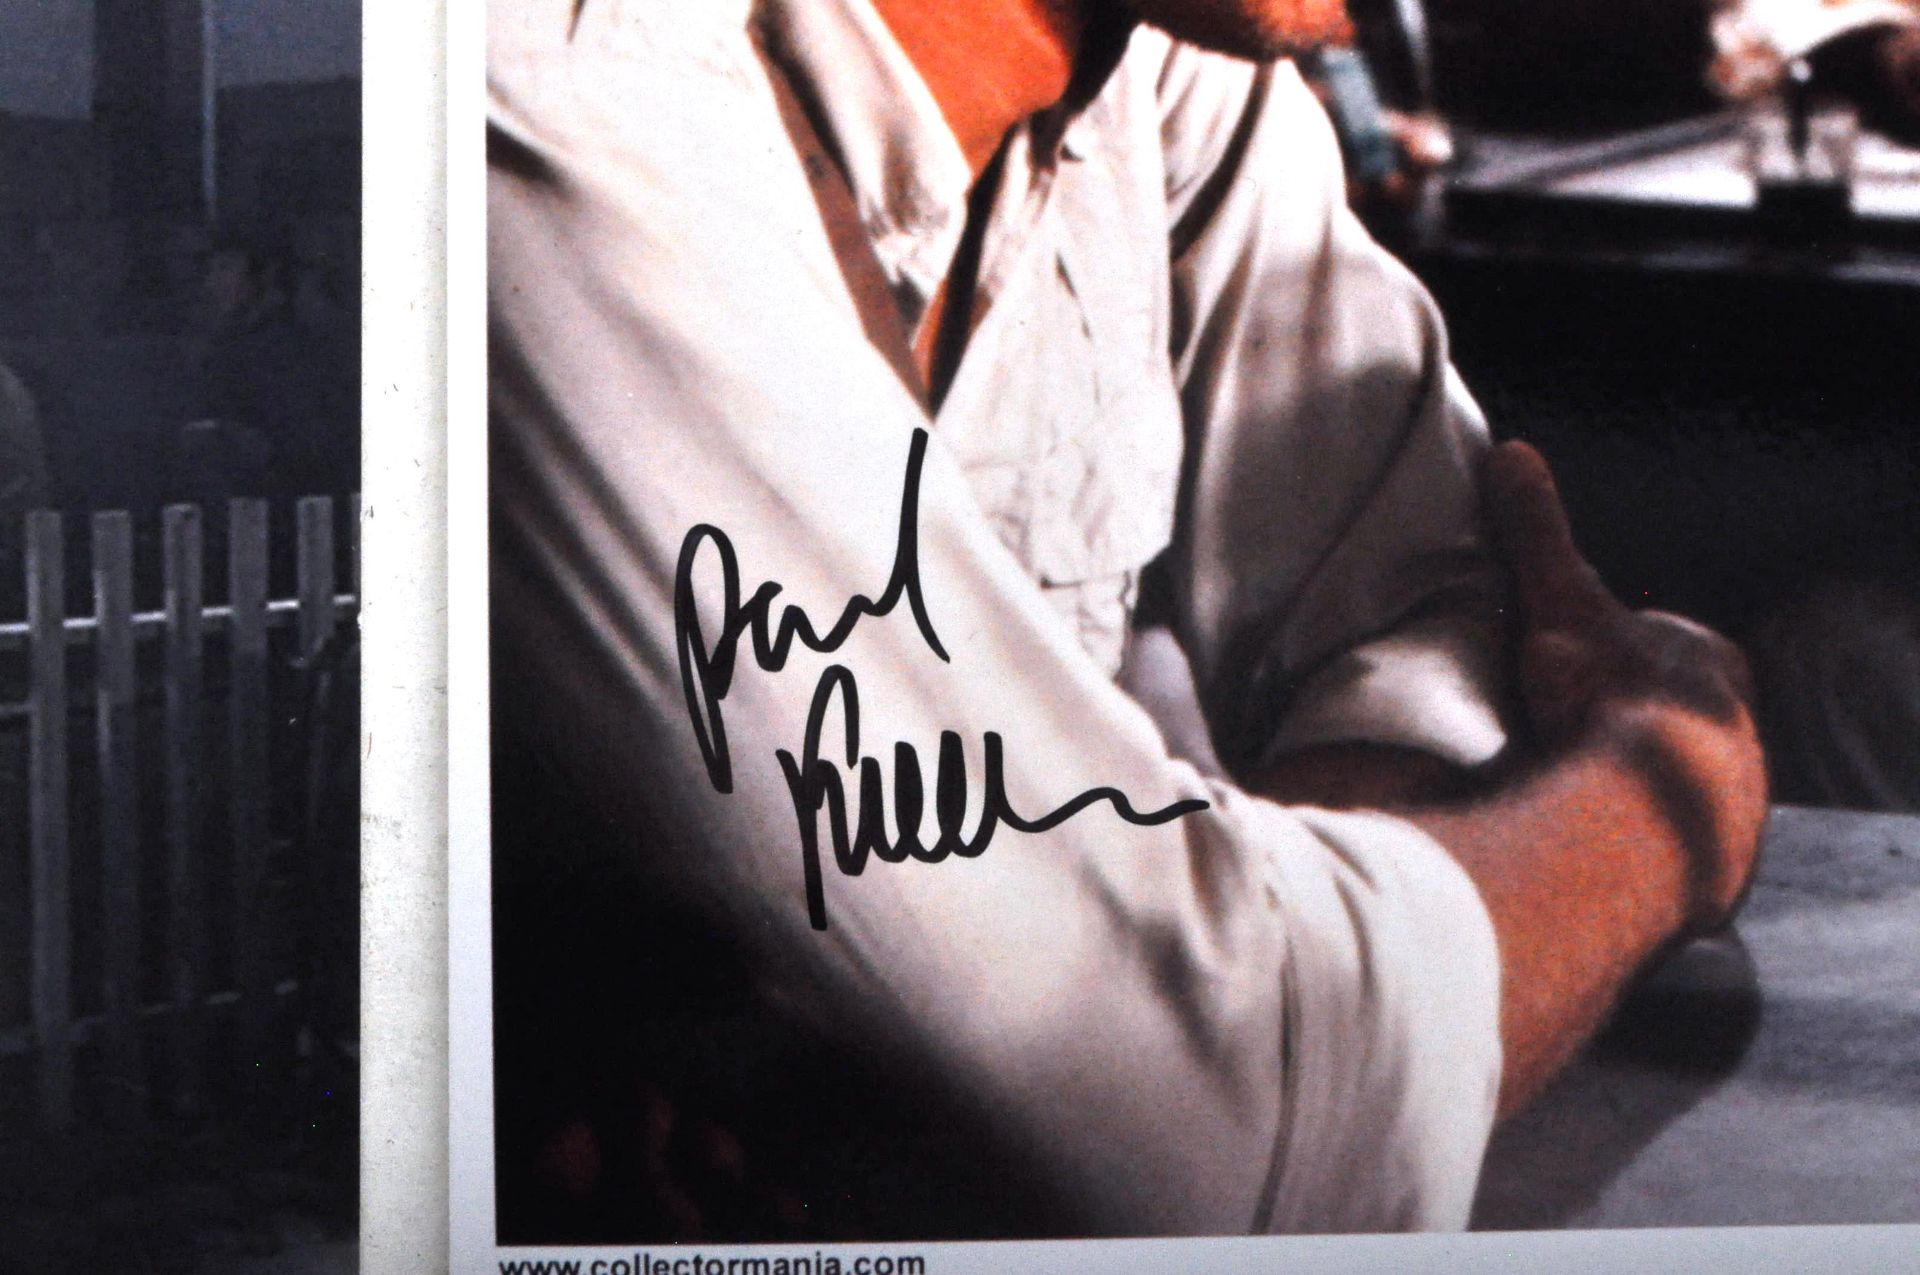 INDIANA JONES - COLLECTION OF SIGNED 8X10" PHOTOGRAPHS - Image 5 of 5